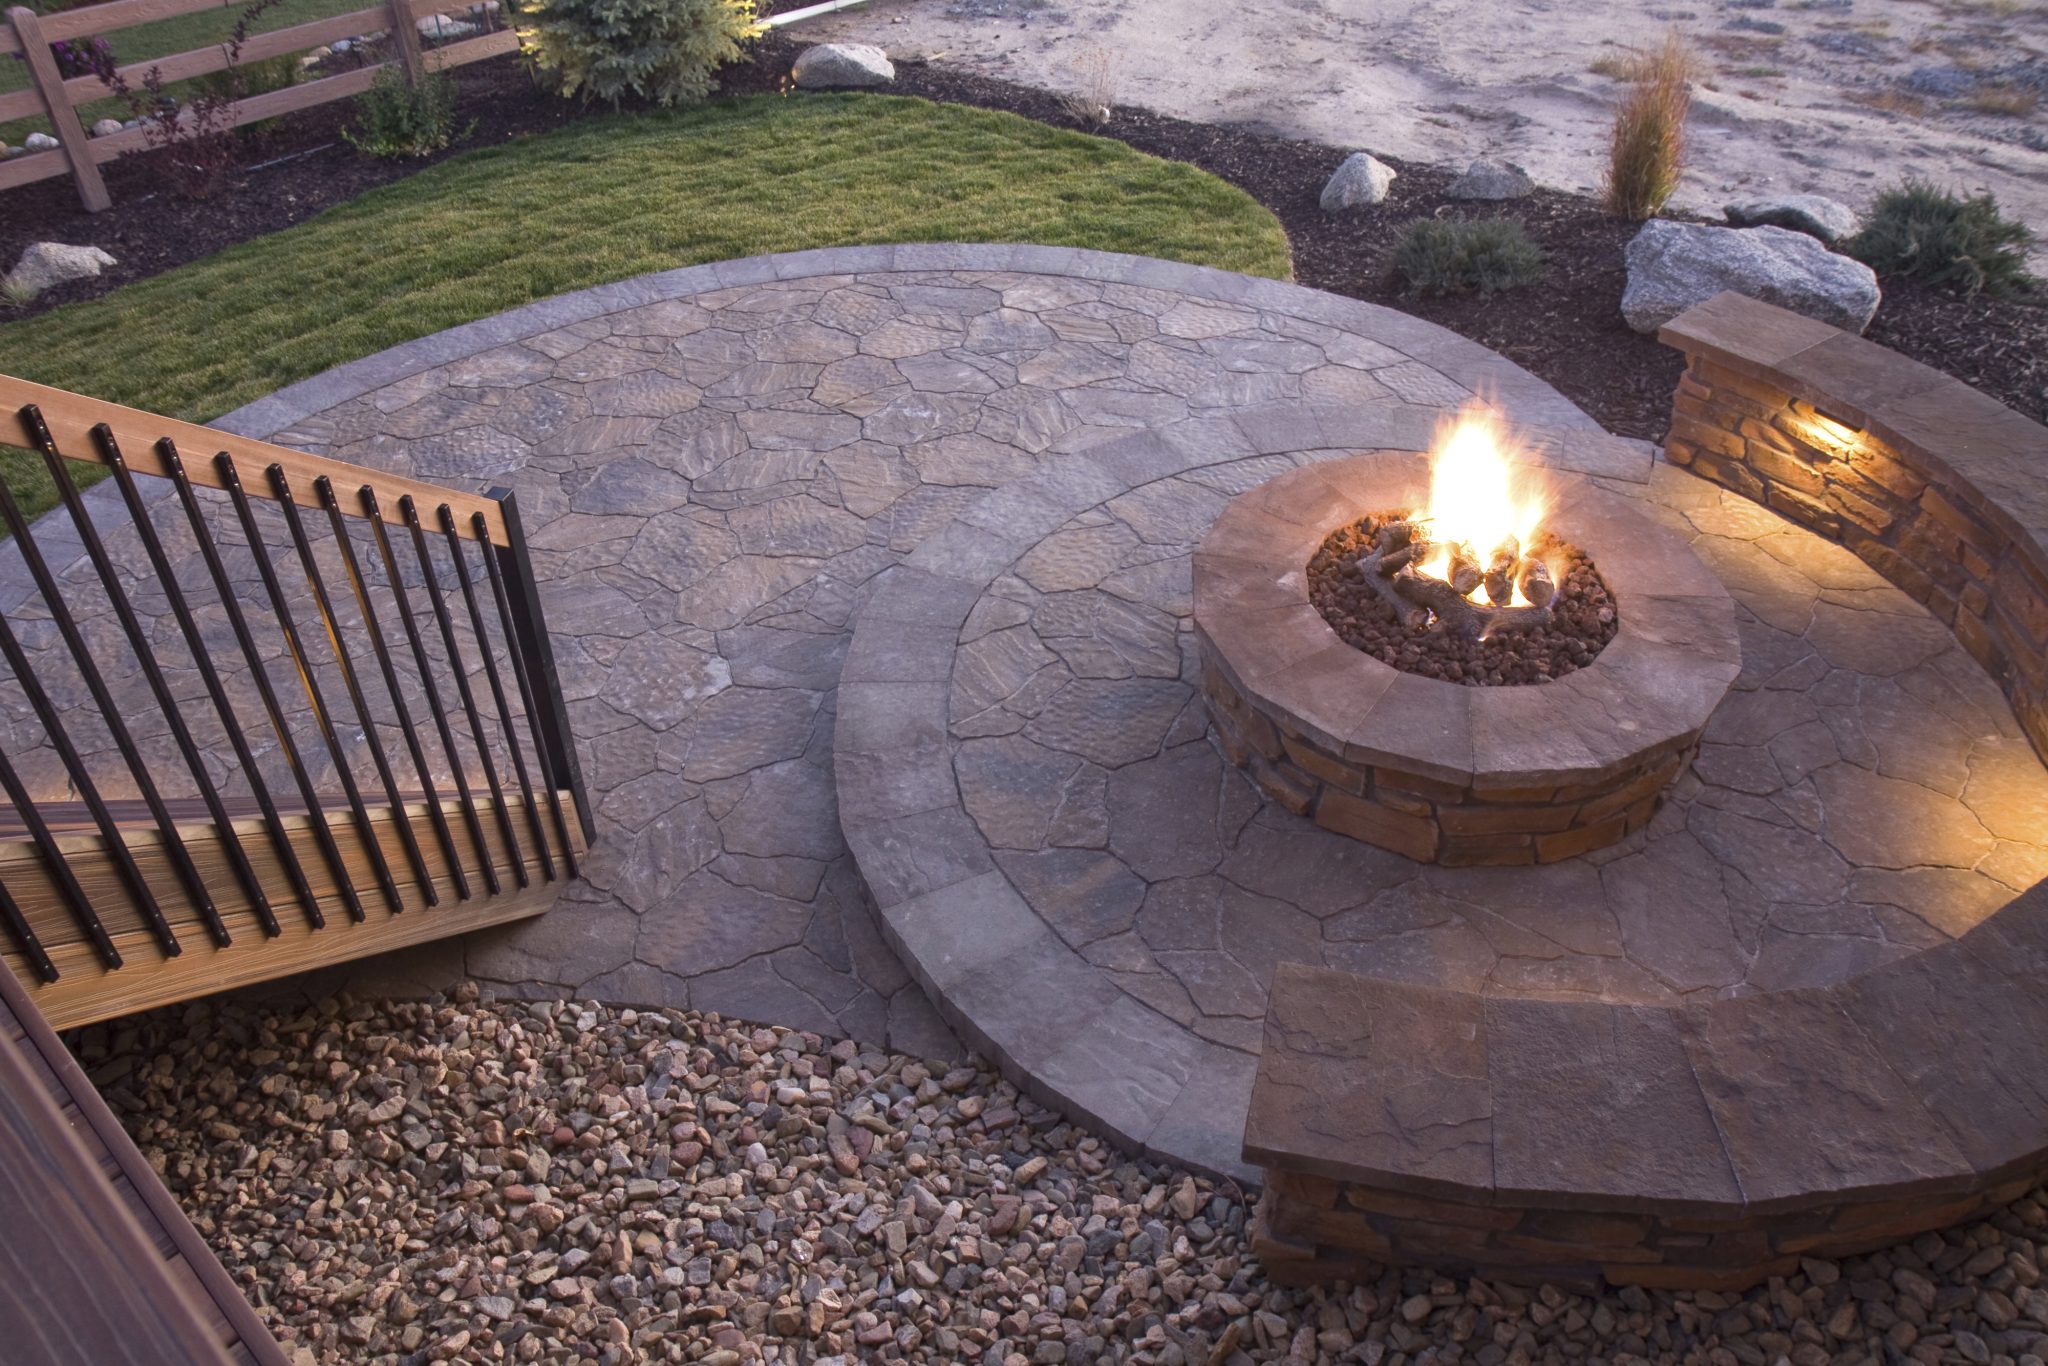 Check out these safety tips for enjoying your outdoor fire pit this summer.